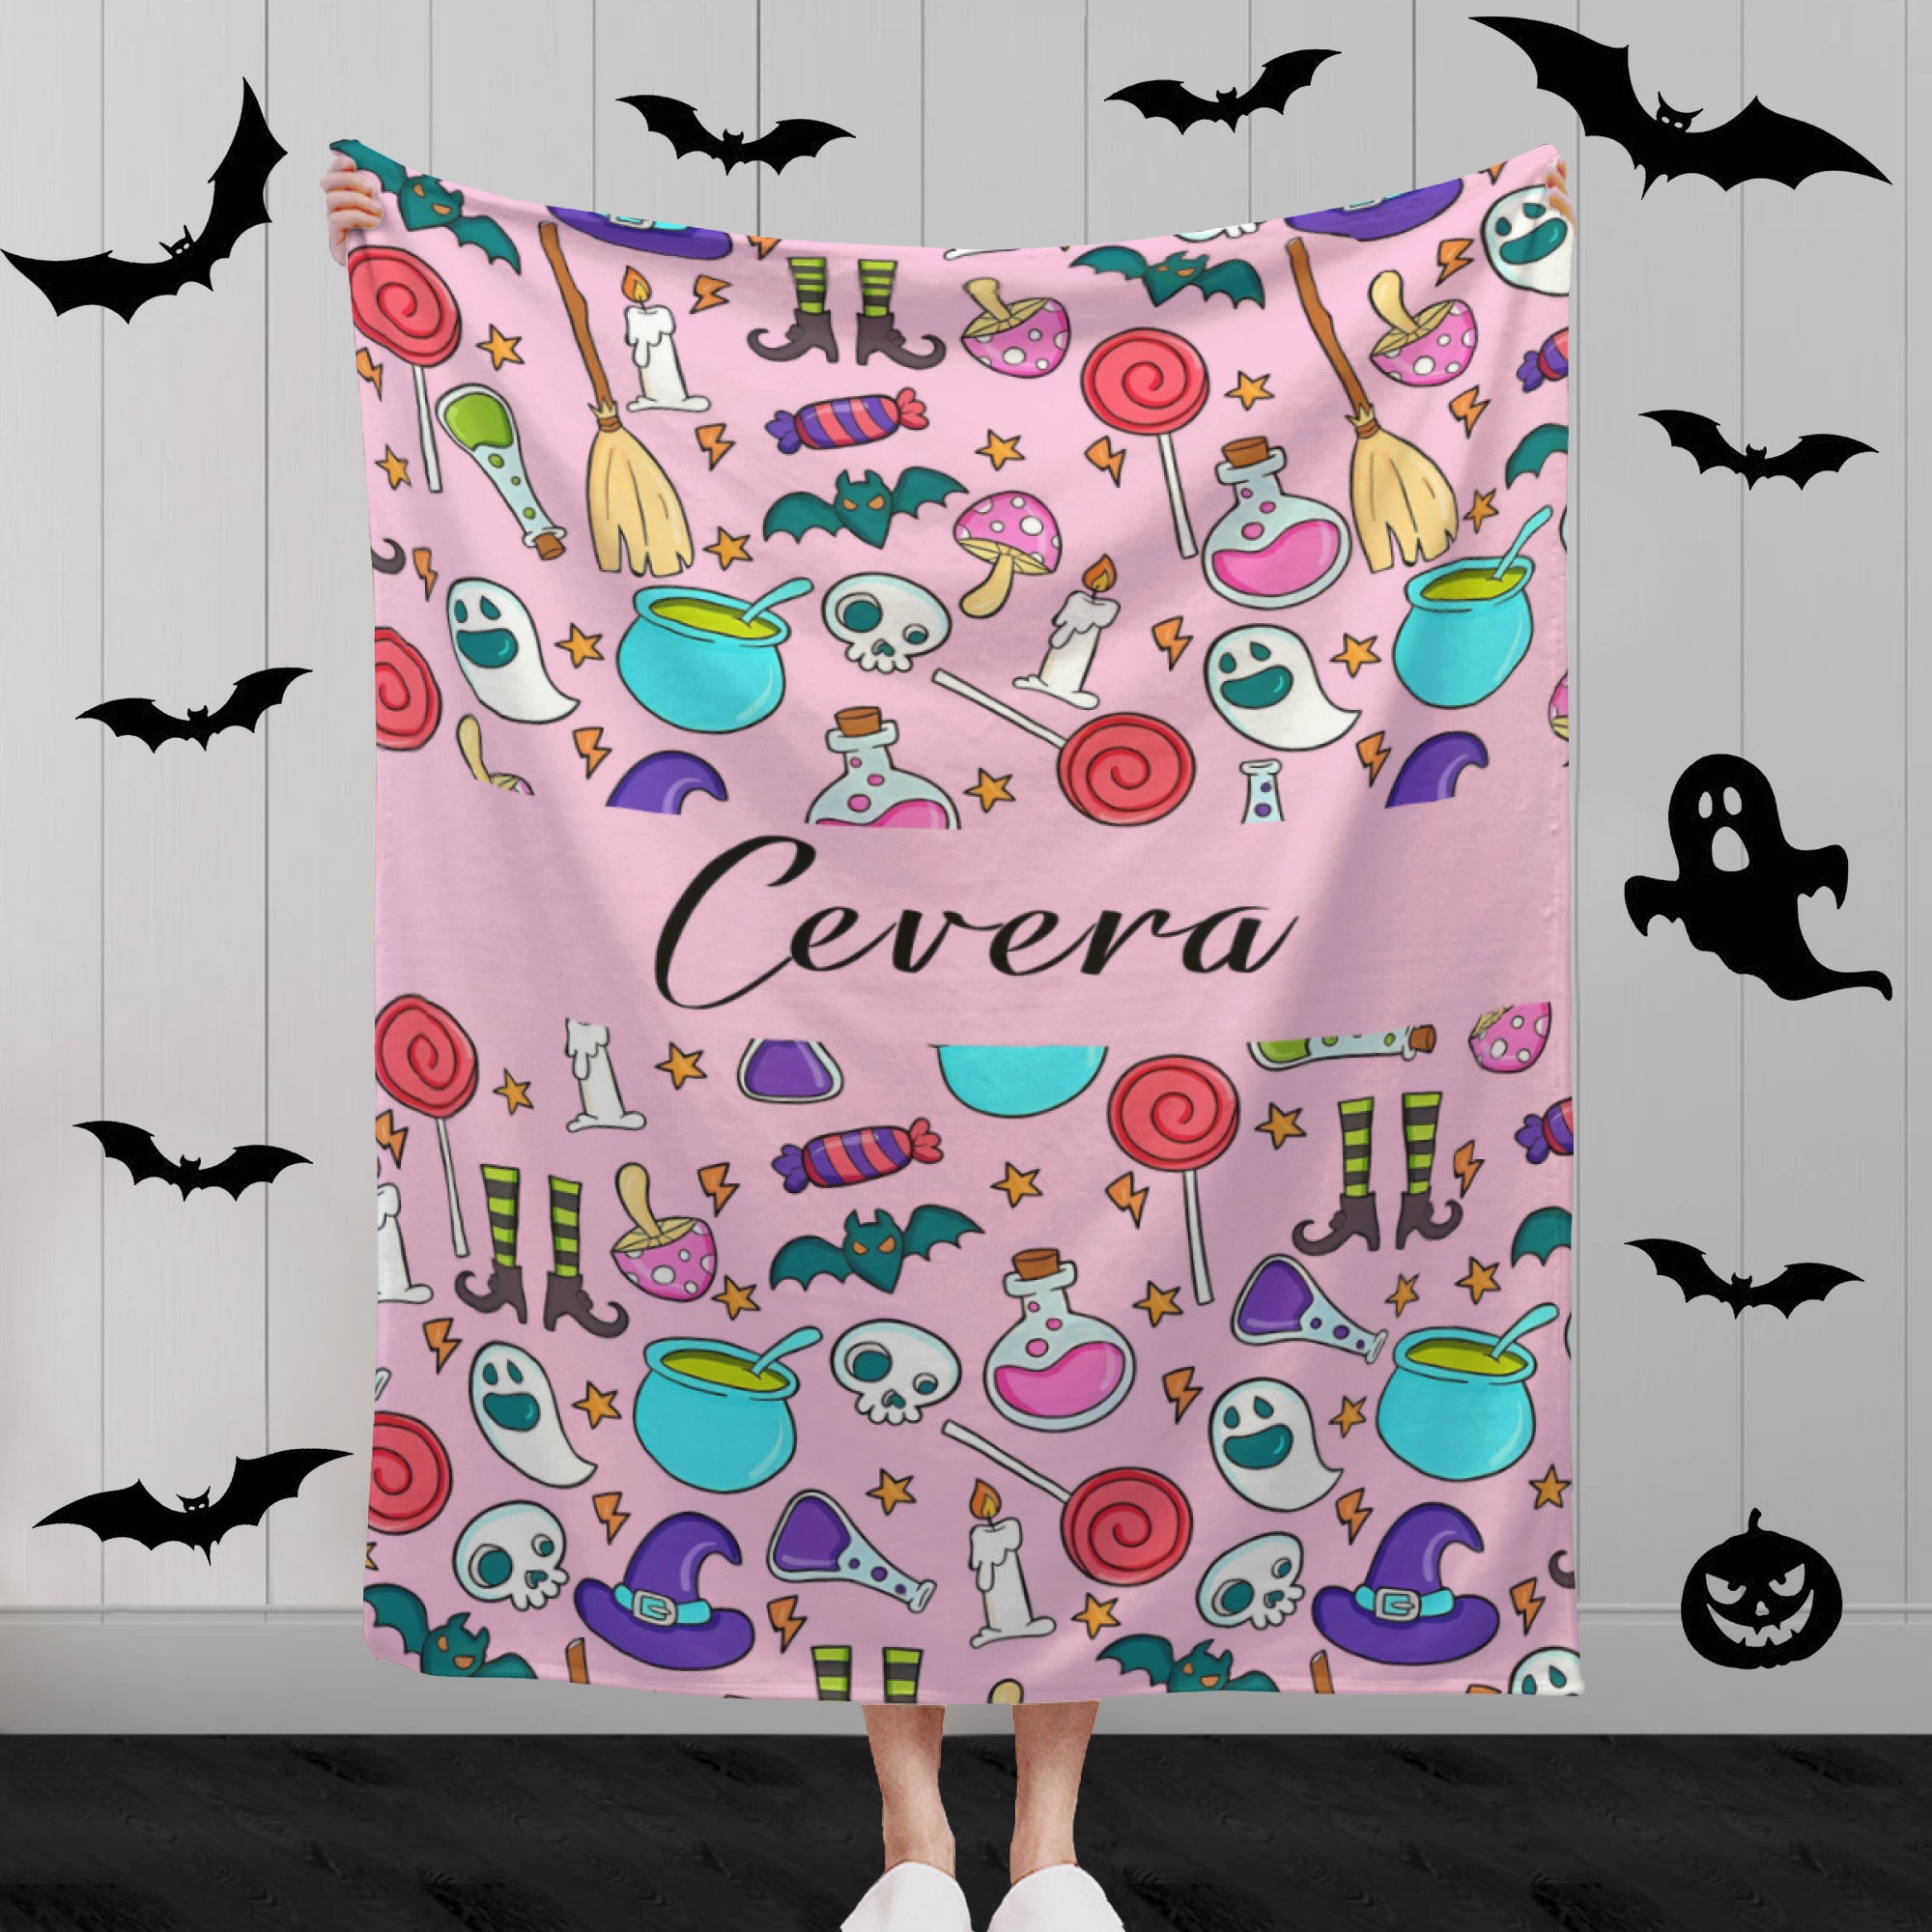 Halloween Blanket - Funny Halloween Gift - Blanket with Name - Best Gift for Family and Kids